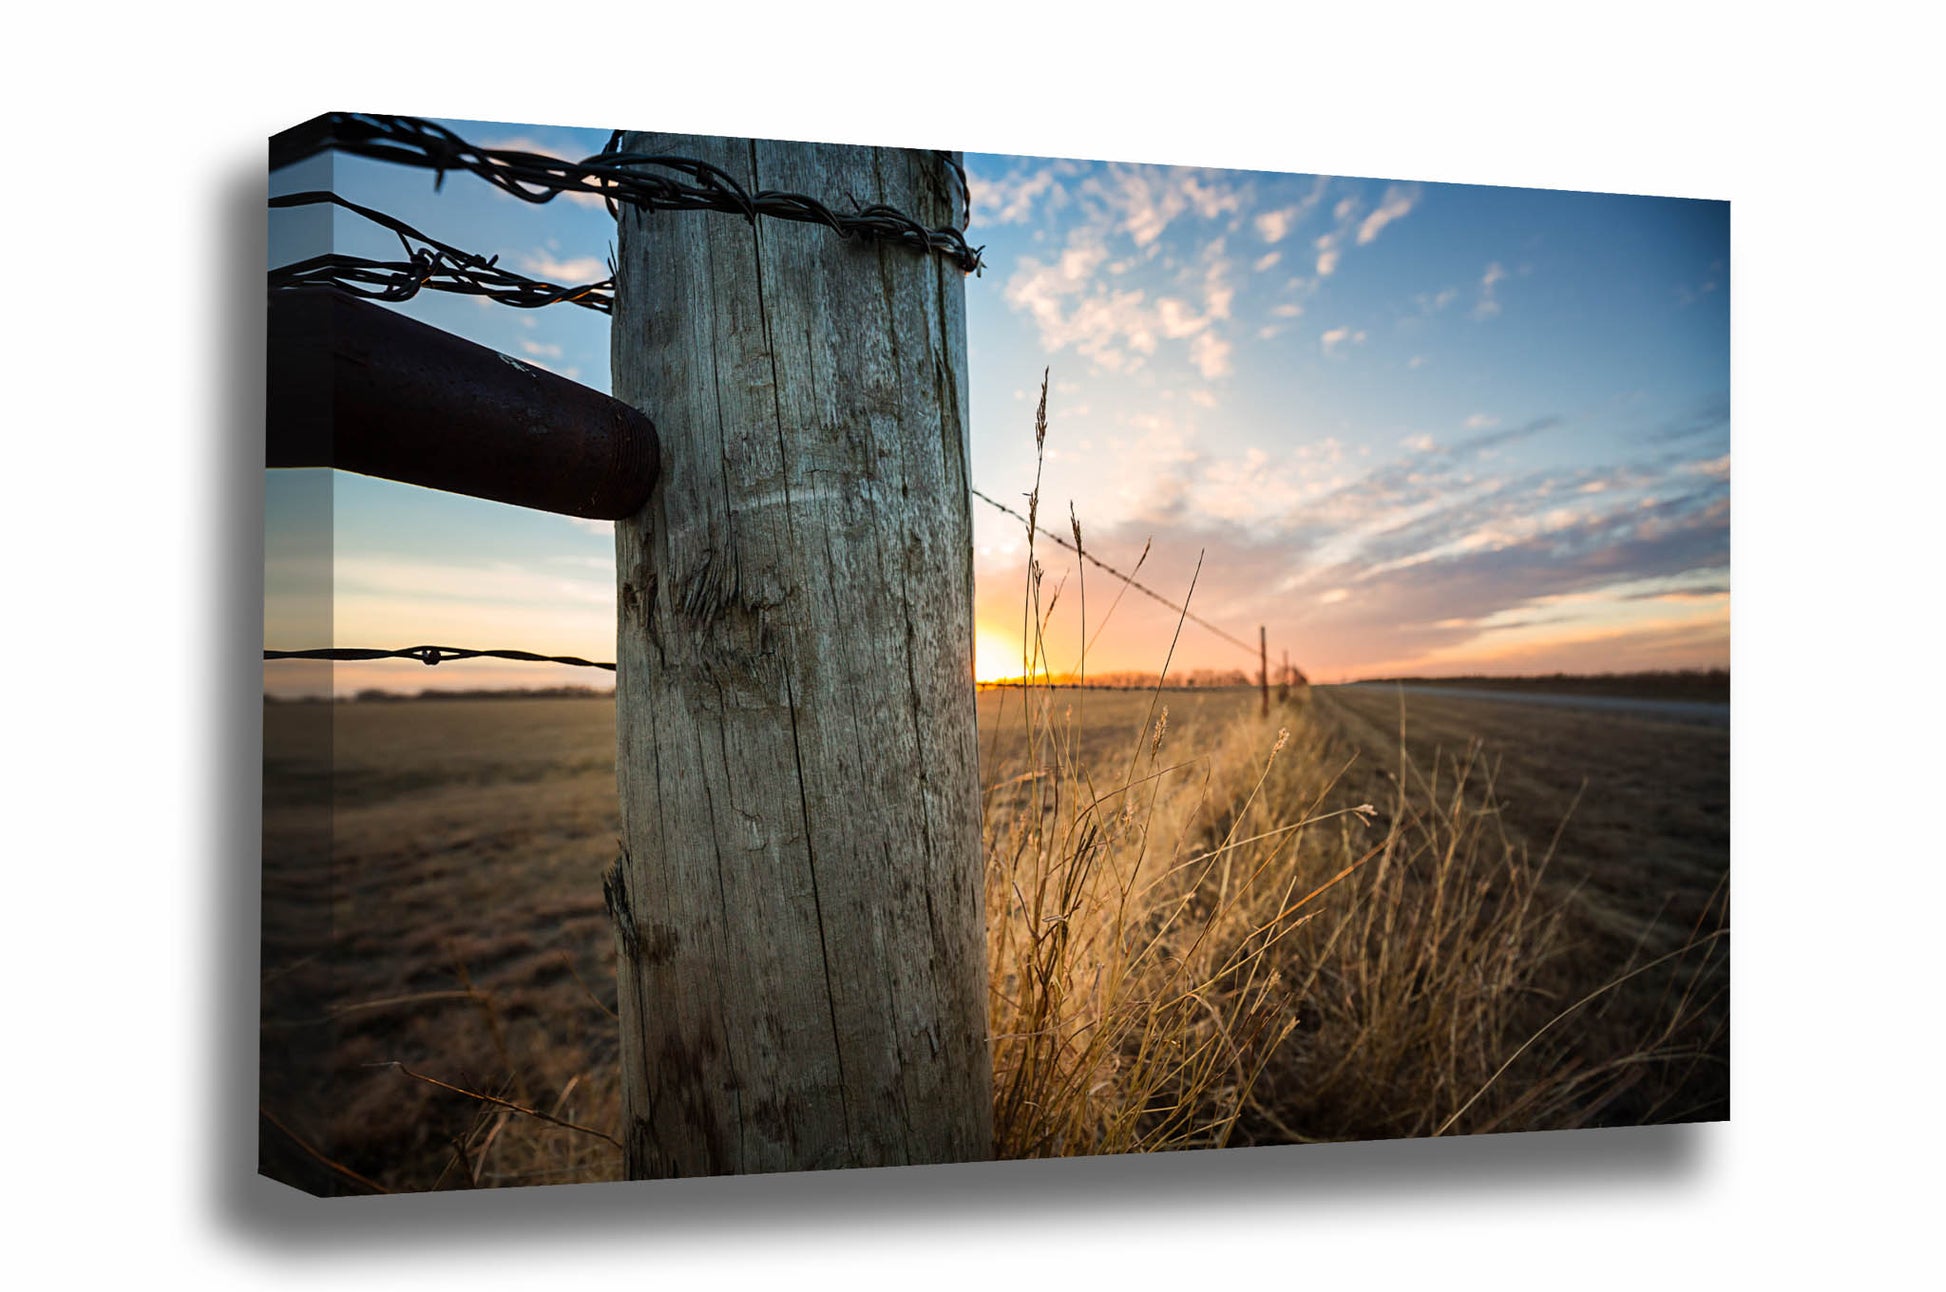 Country canvas wall art of a fence post and prairie grass in golden sunlight at sunset on a chilly winter evening in Oklahoma by Sean Ramsey of Southern Plains Photography.